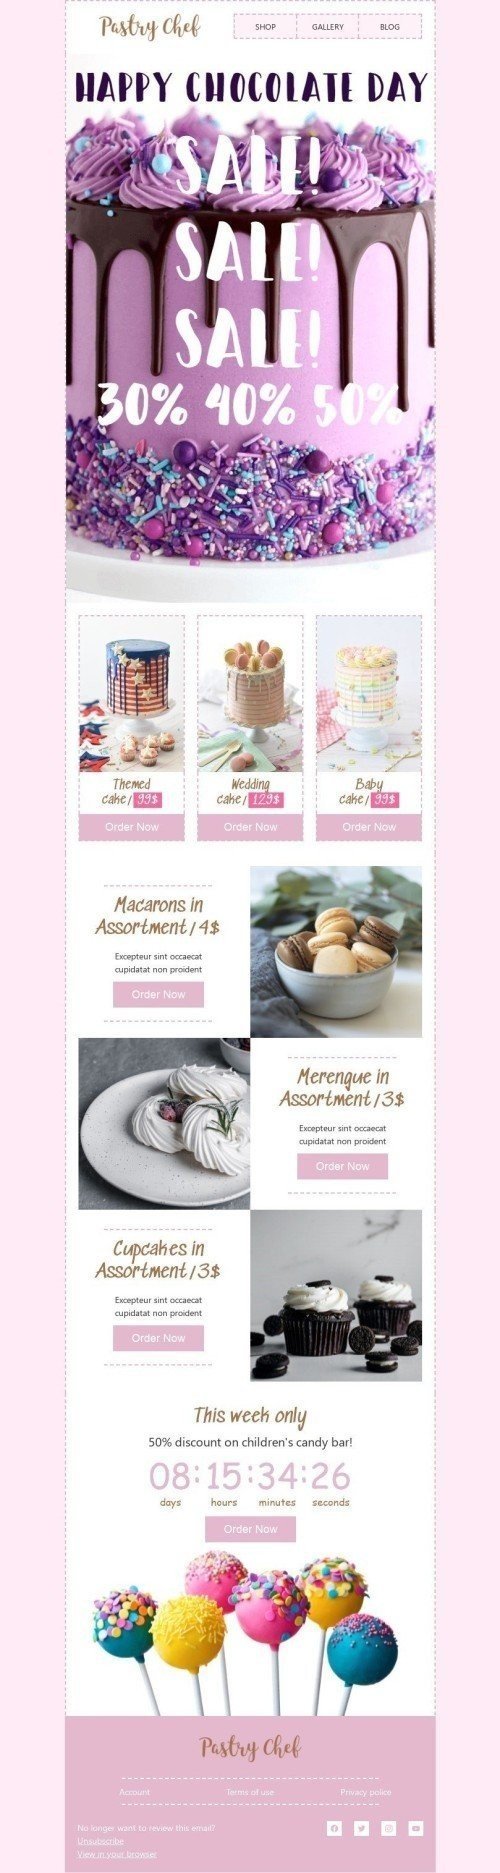 International Chocolate Day Email Template «Children's candy bar» for Food industry mobile view